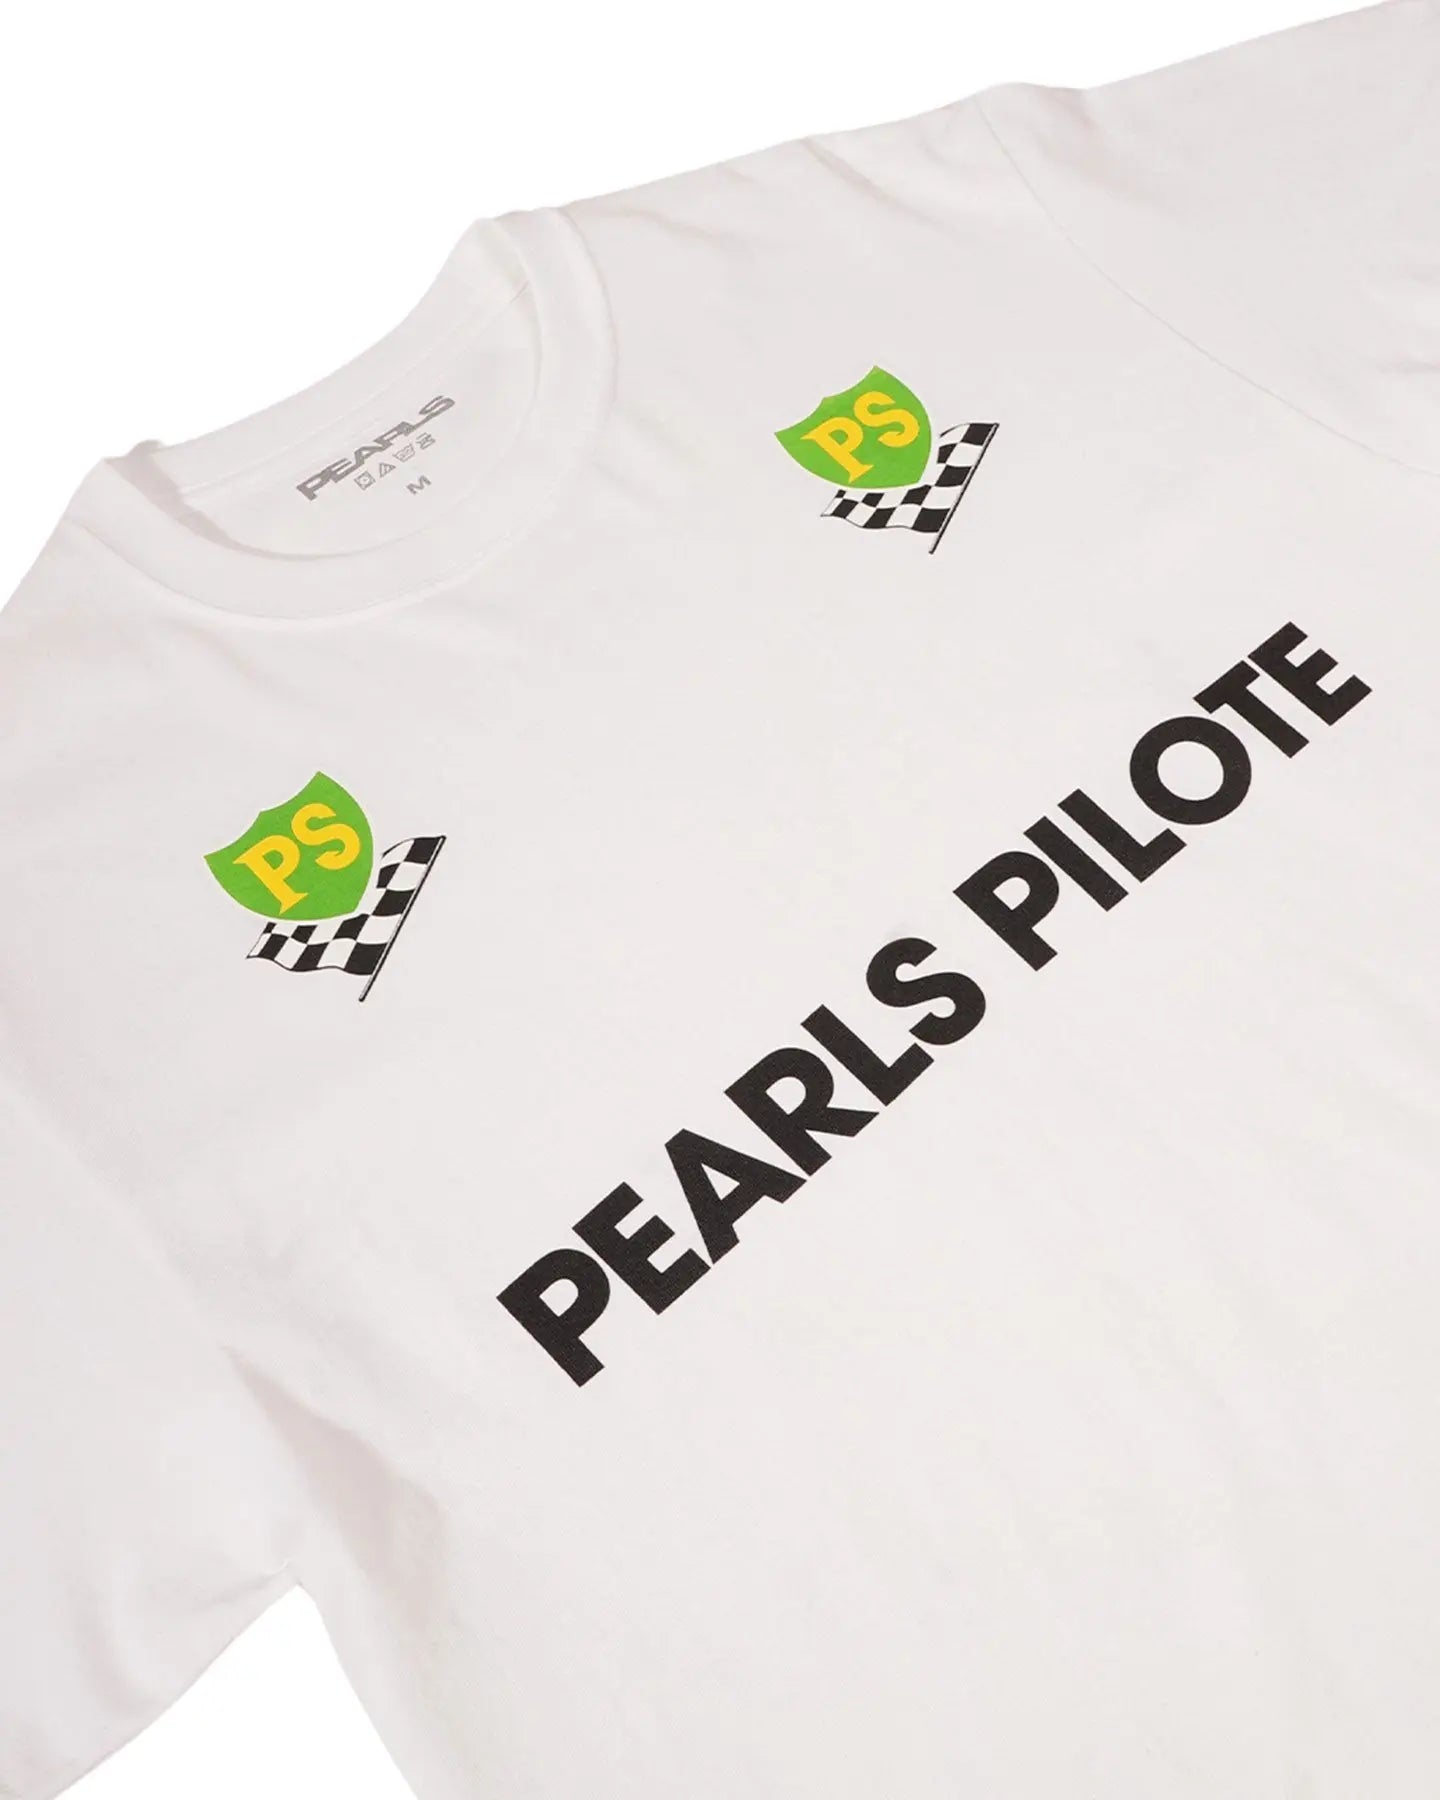 Pearls Michele Mouton SS Tee - White SS Tees